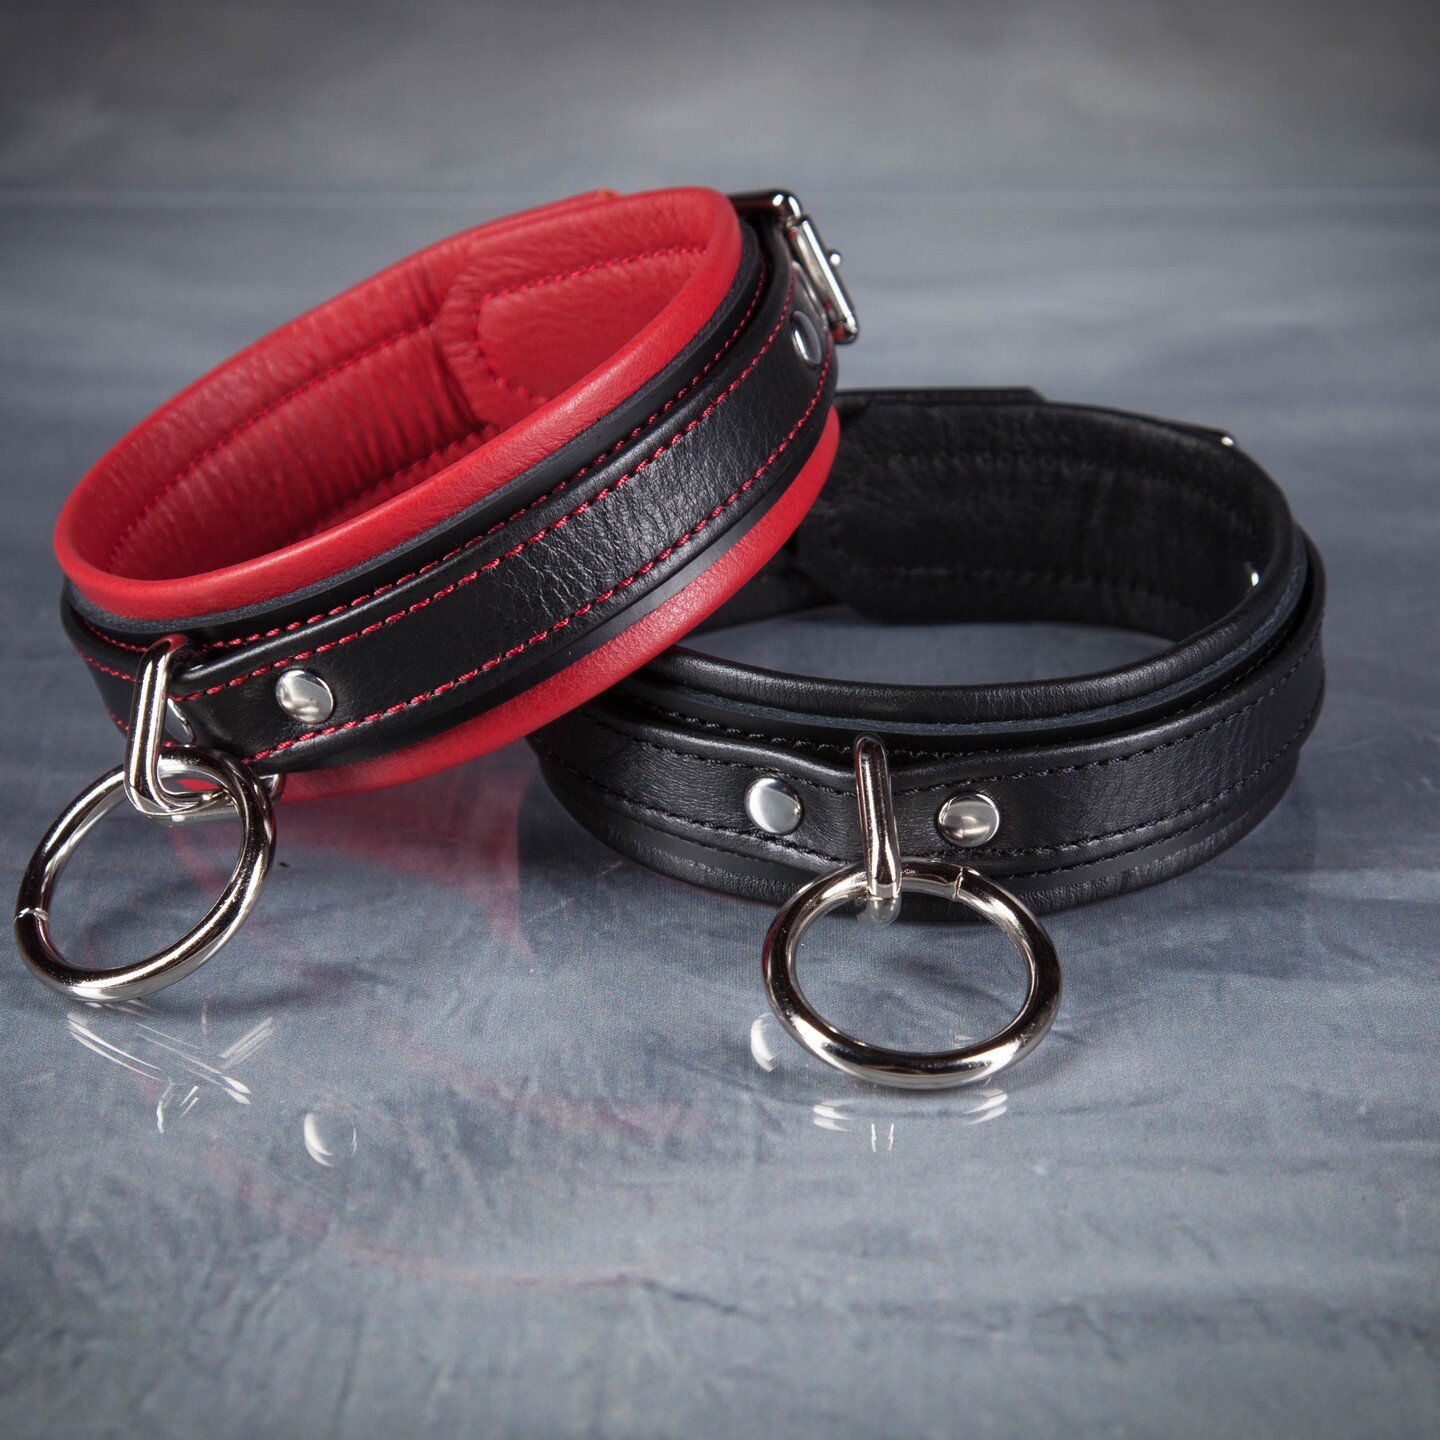 Dominate your partner with style with our premium handmade bondage collars. Perfect for any BDSM play or as a fashion accessory. #BitchesLoveLeather #BondageCollar #DominationPlay #FashionAccessories